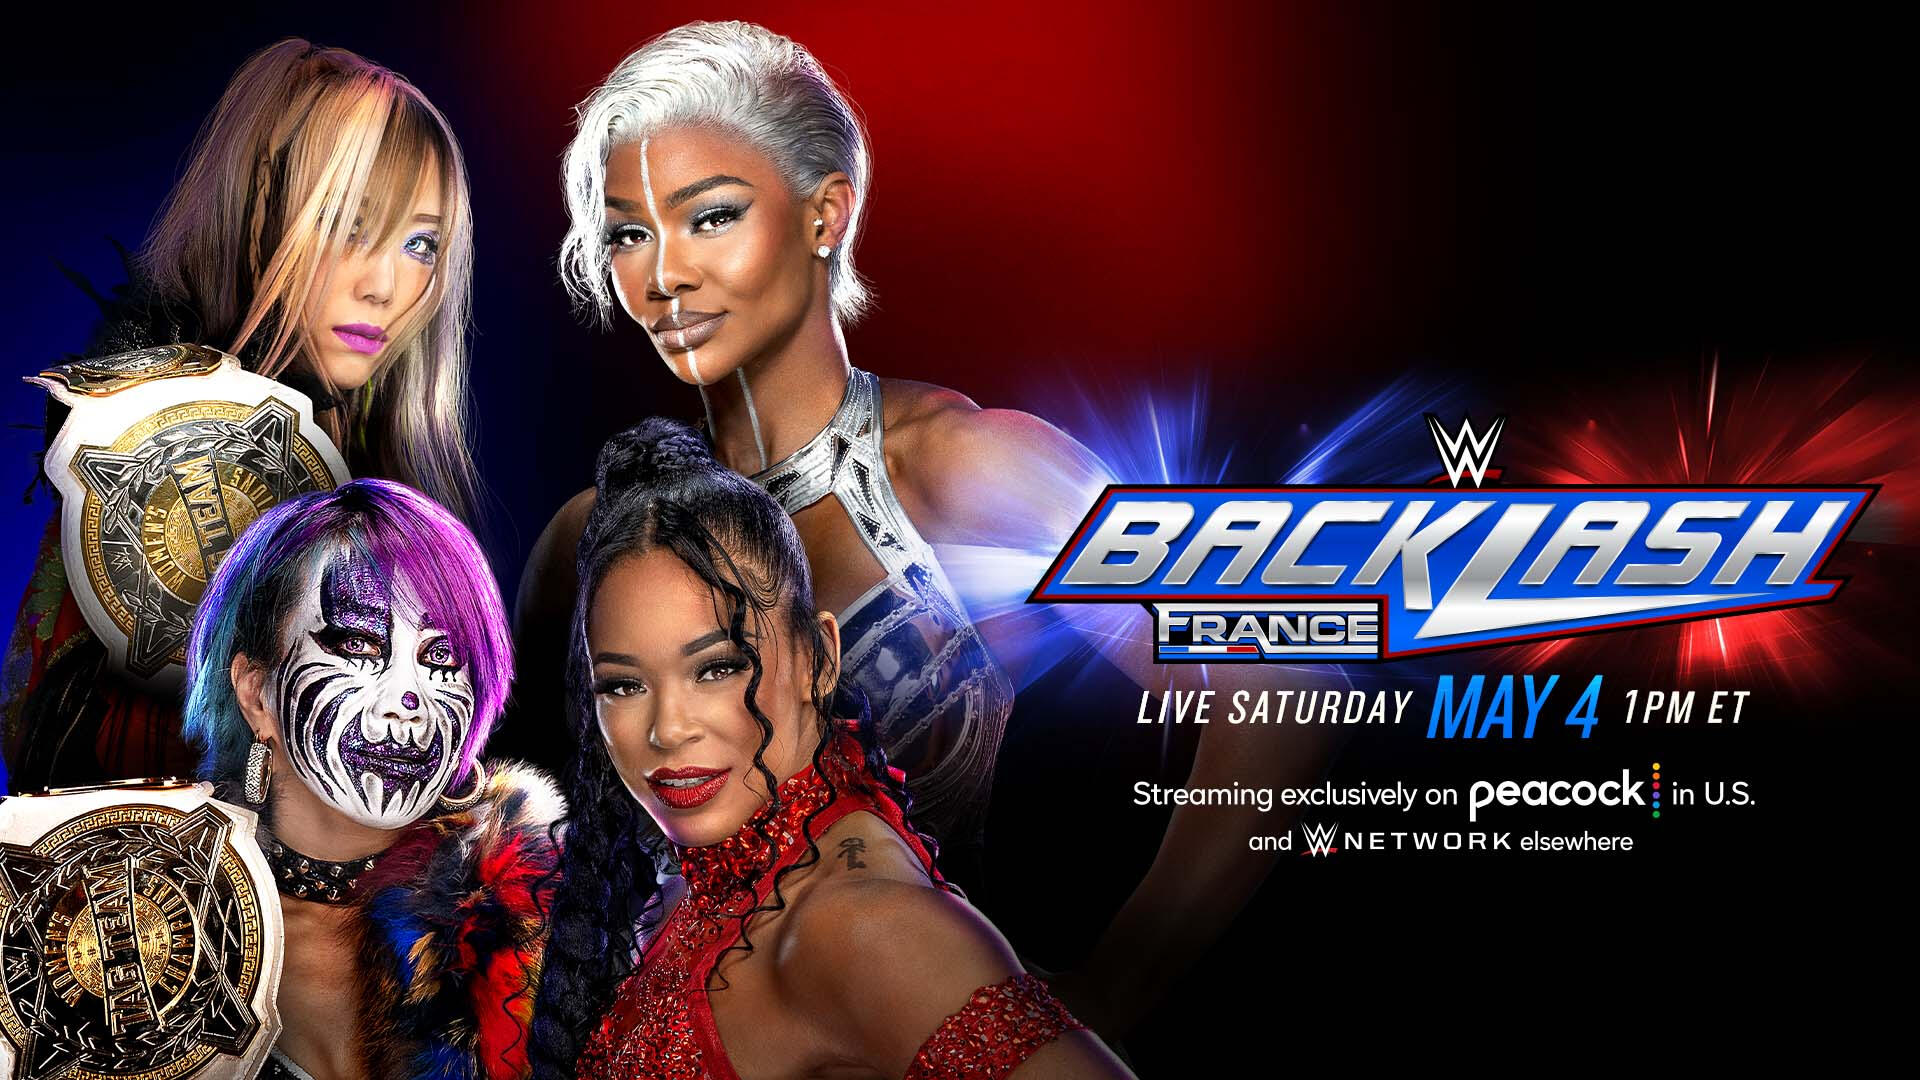 France Hosts WWE Backlash, Crowning New Women’s Tag Team Champions